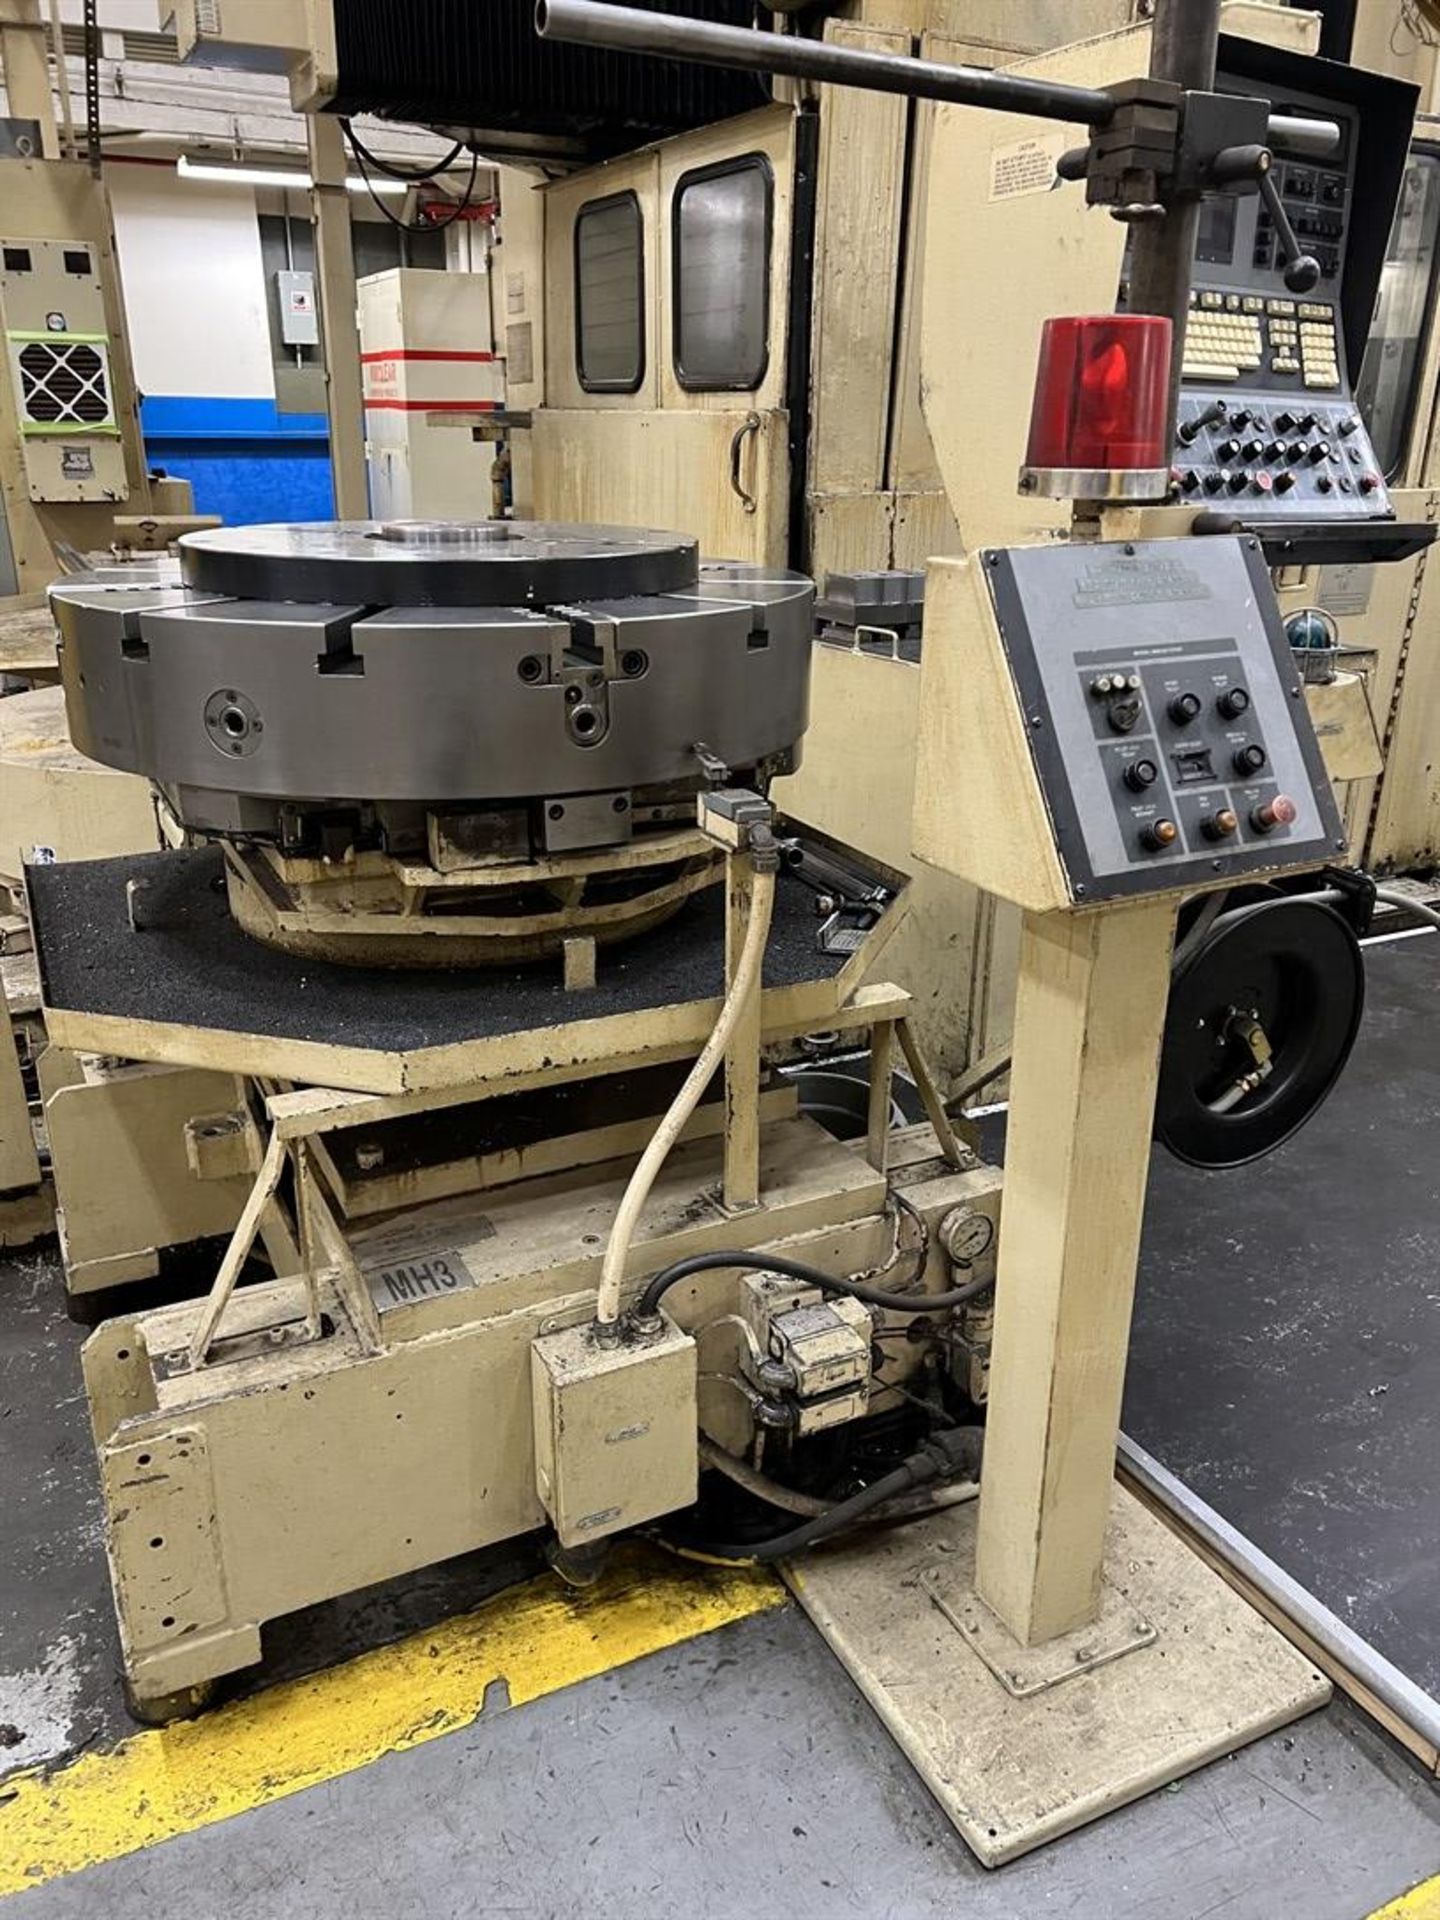 GIDDINGS & LEWIS 36 VTC Twin Pallet Vertical Turning Center with Milling, s/n 511-137-90, G & L - Image 2 of 15